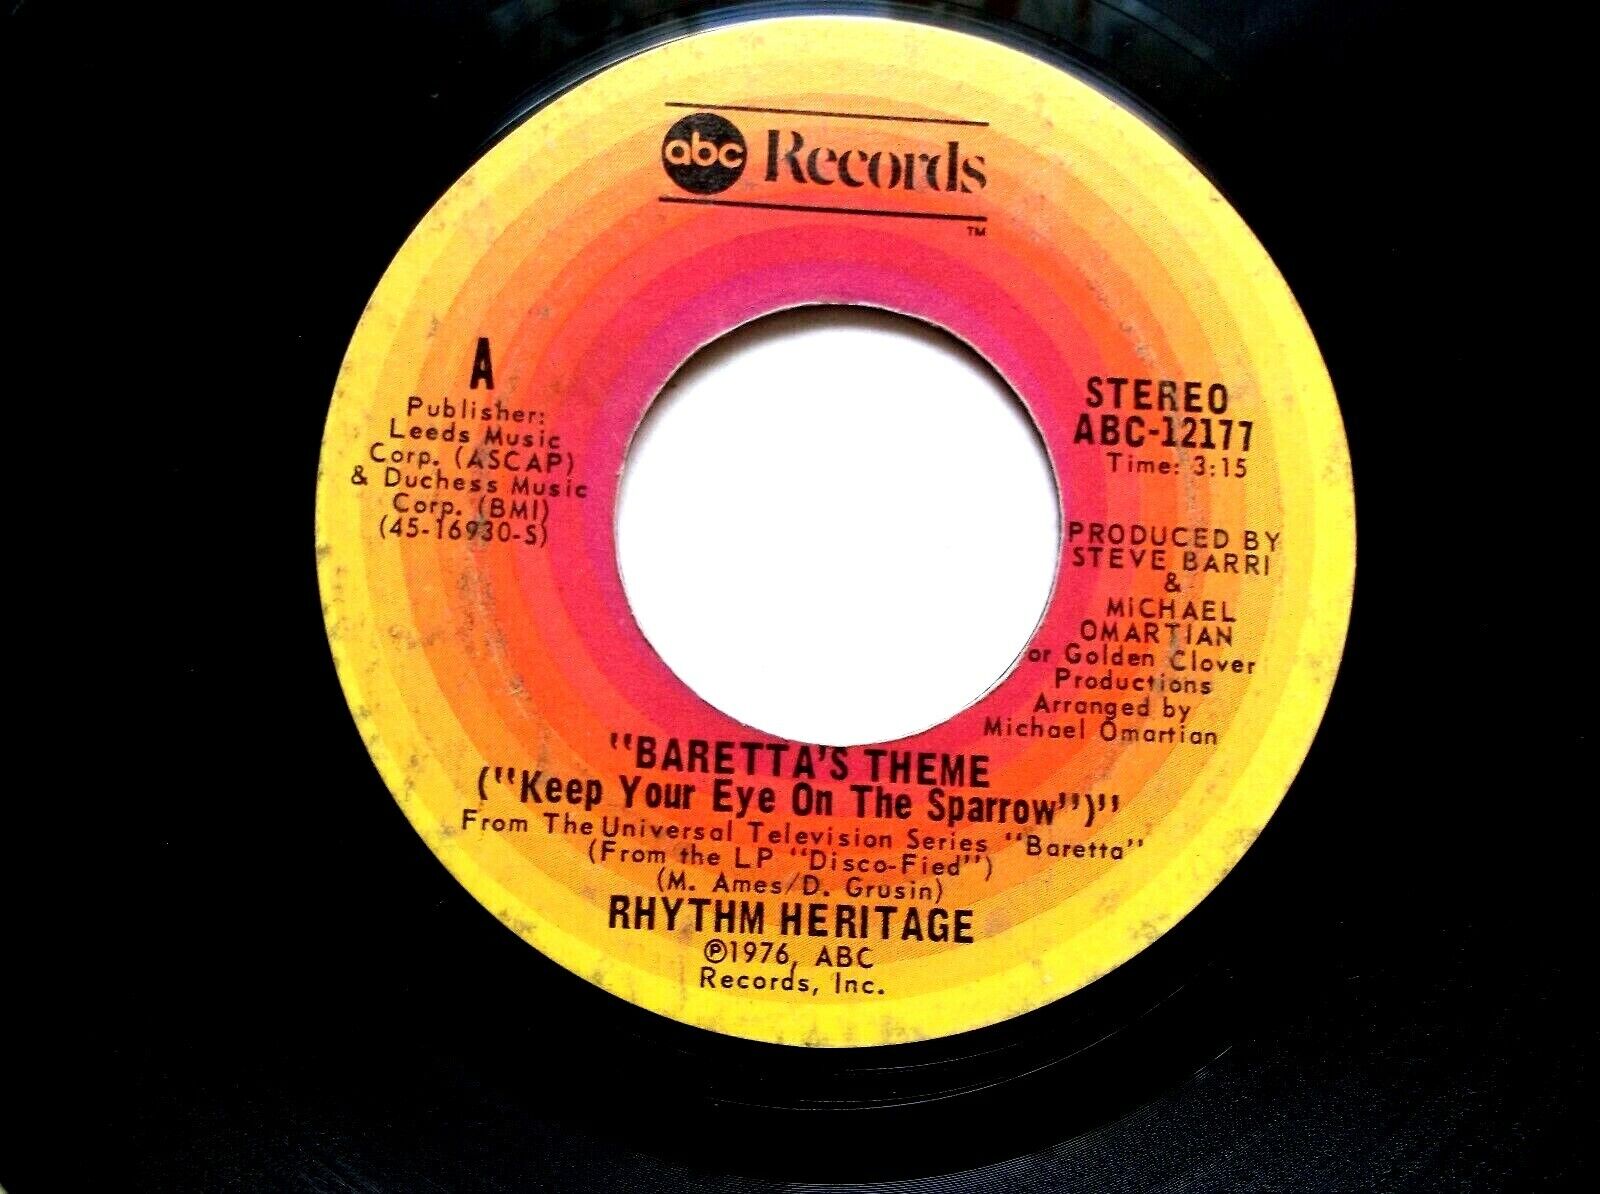 MY CHERIE AMOUR BY RHYTHM HERITAGE 45 RPM POP 7" ABC RECORDS 1976